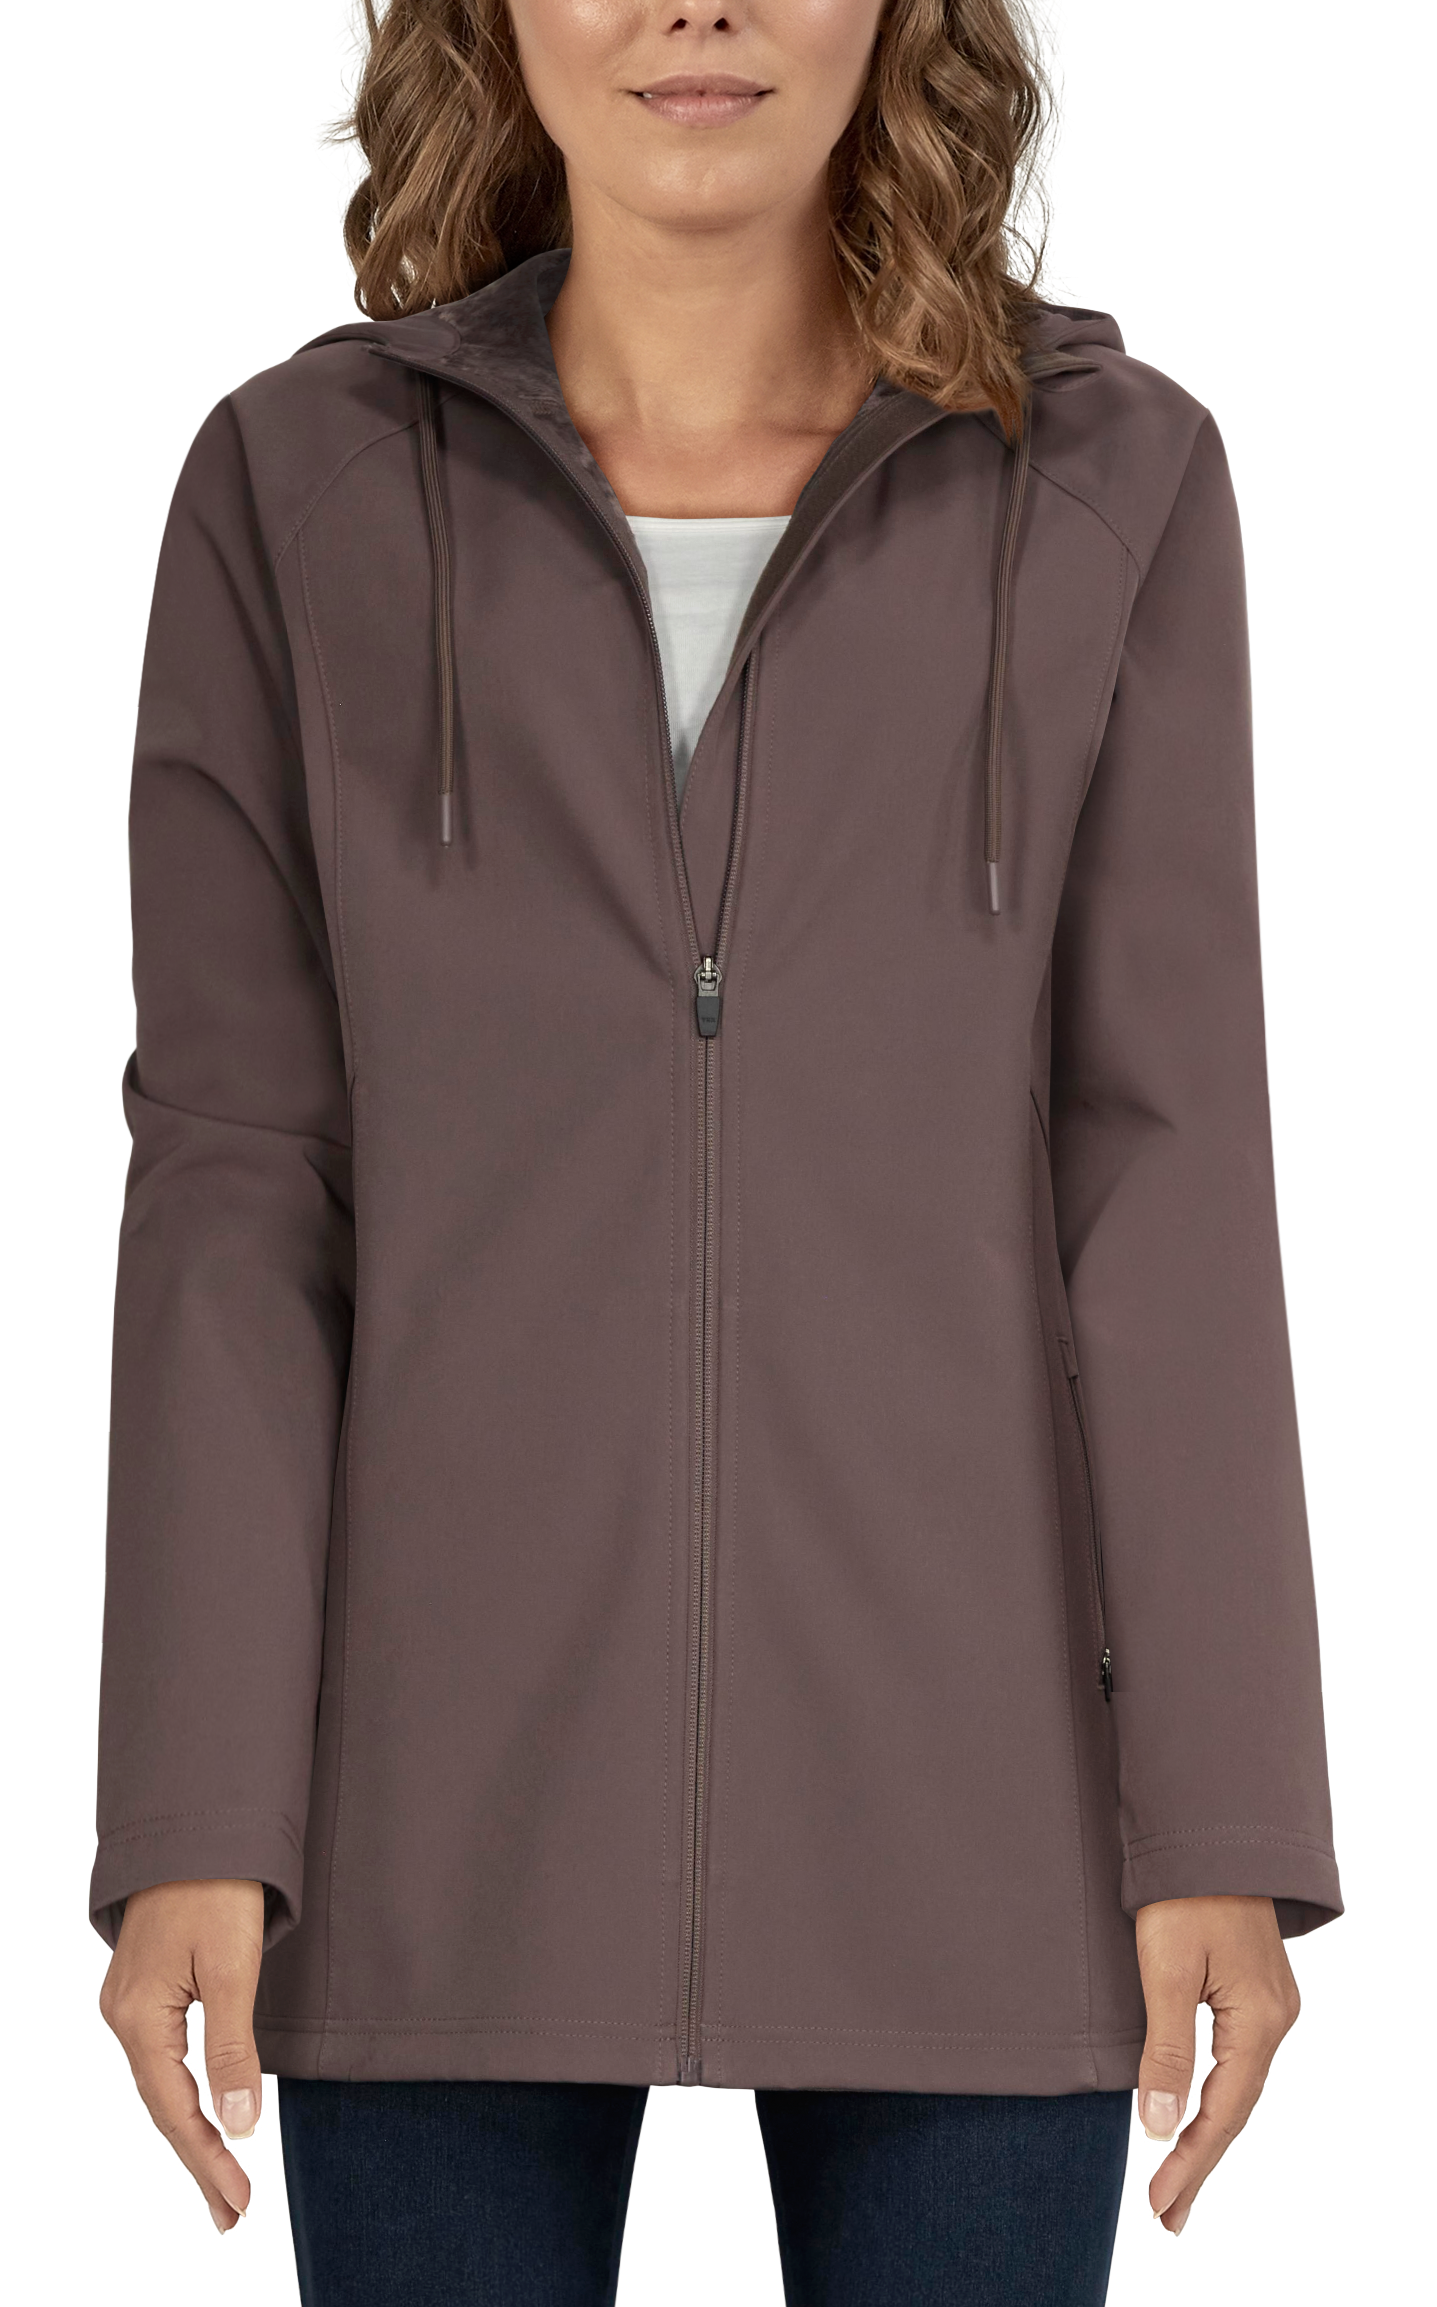 Natural Reflections Bonded Softshell Jacket for Ladies - Plum Truffle - S